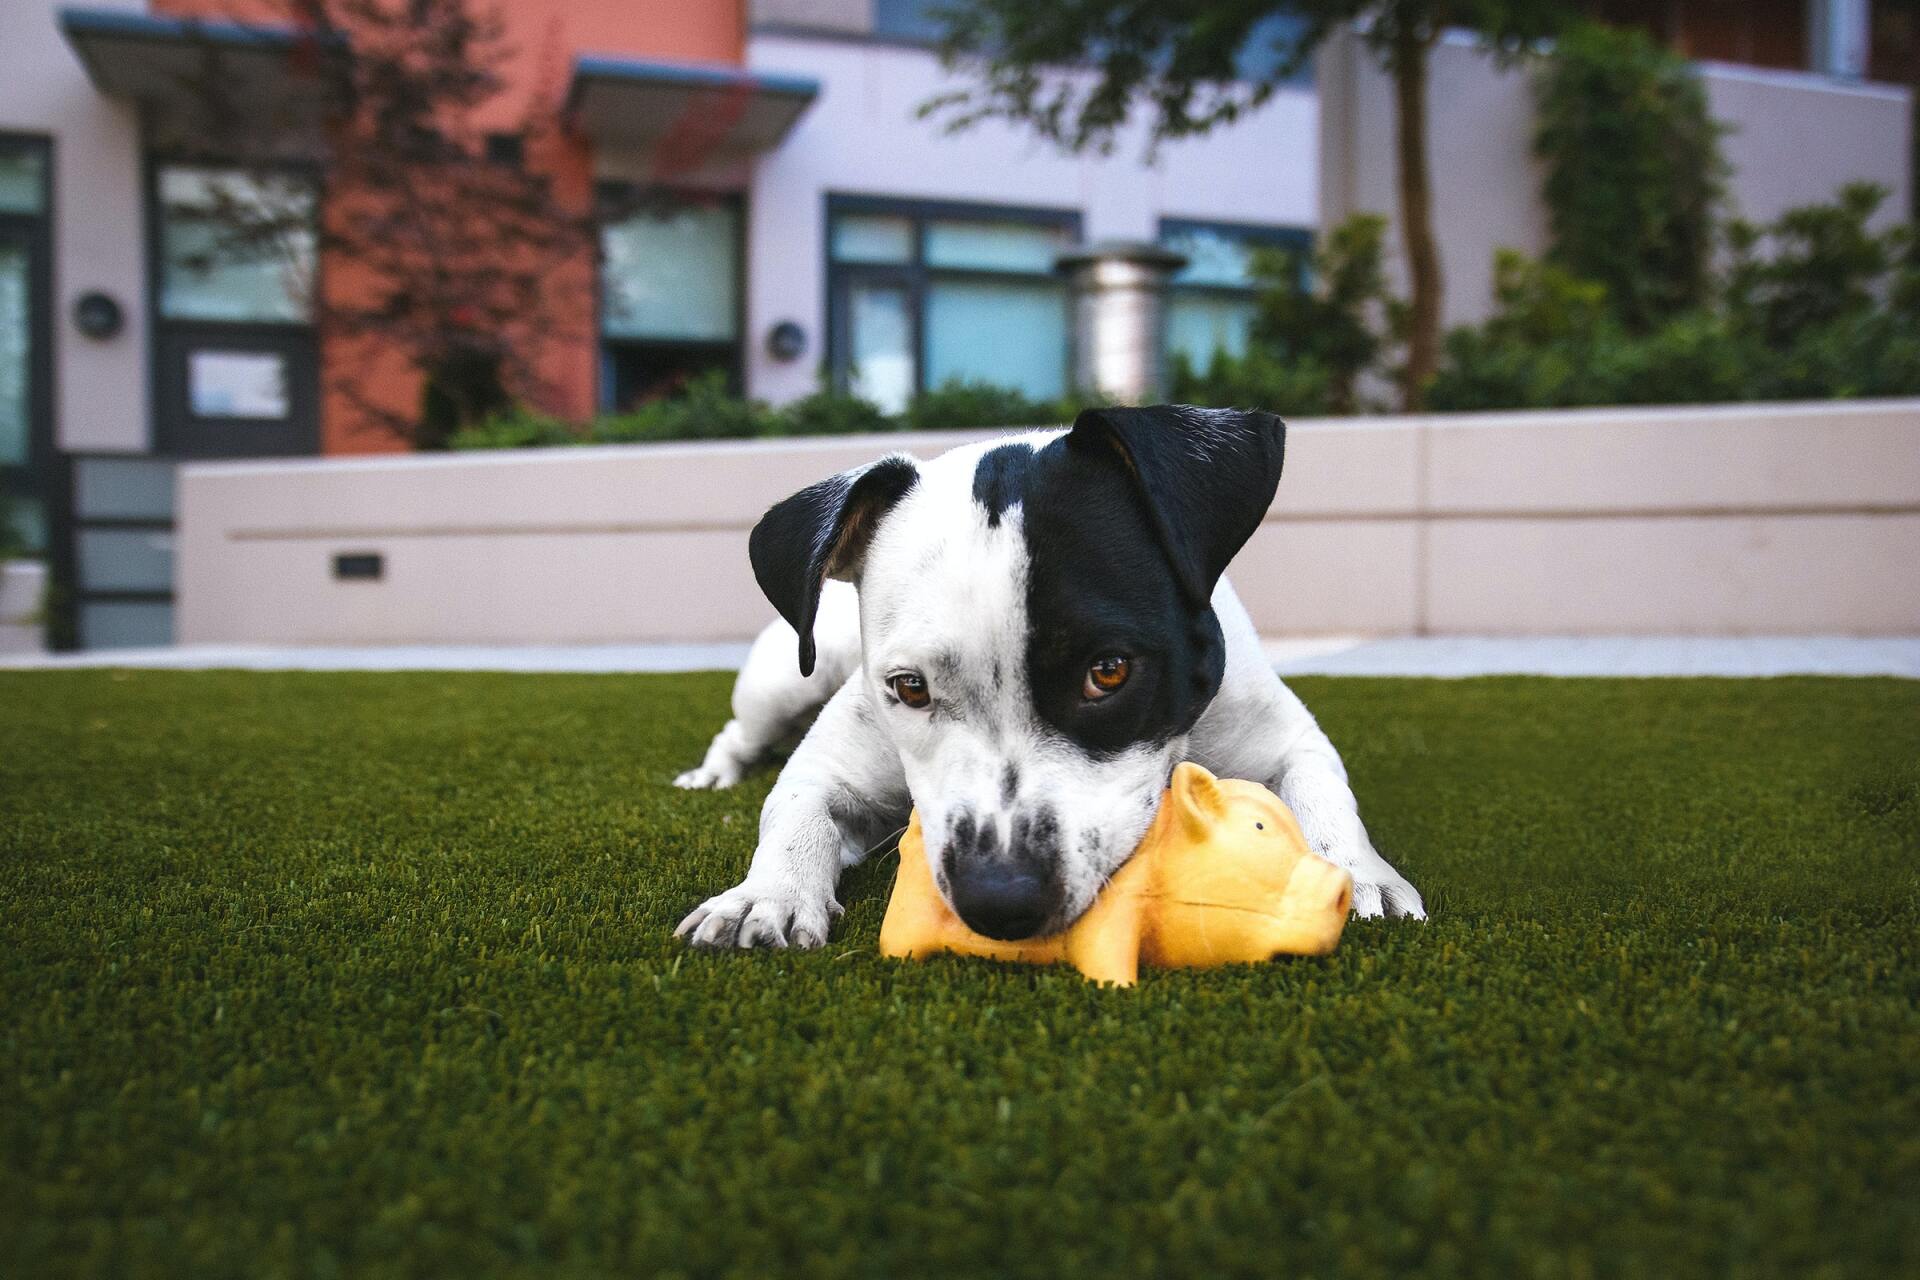 dog chewing a toy, enjoying its time on an artificial turf installed in a residential property in Reno, NV